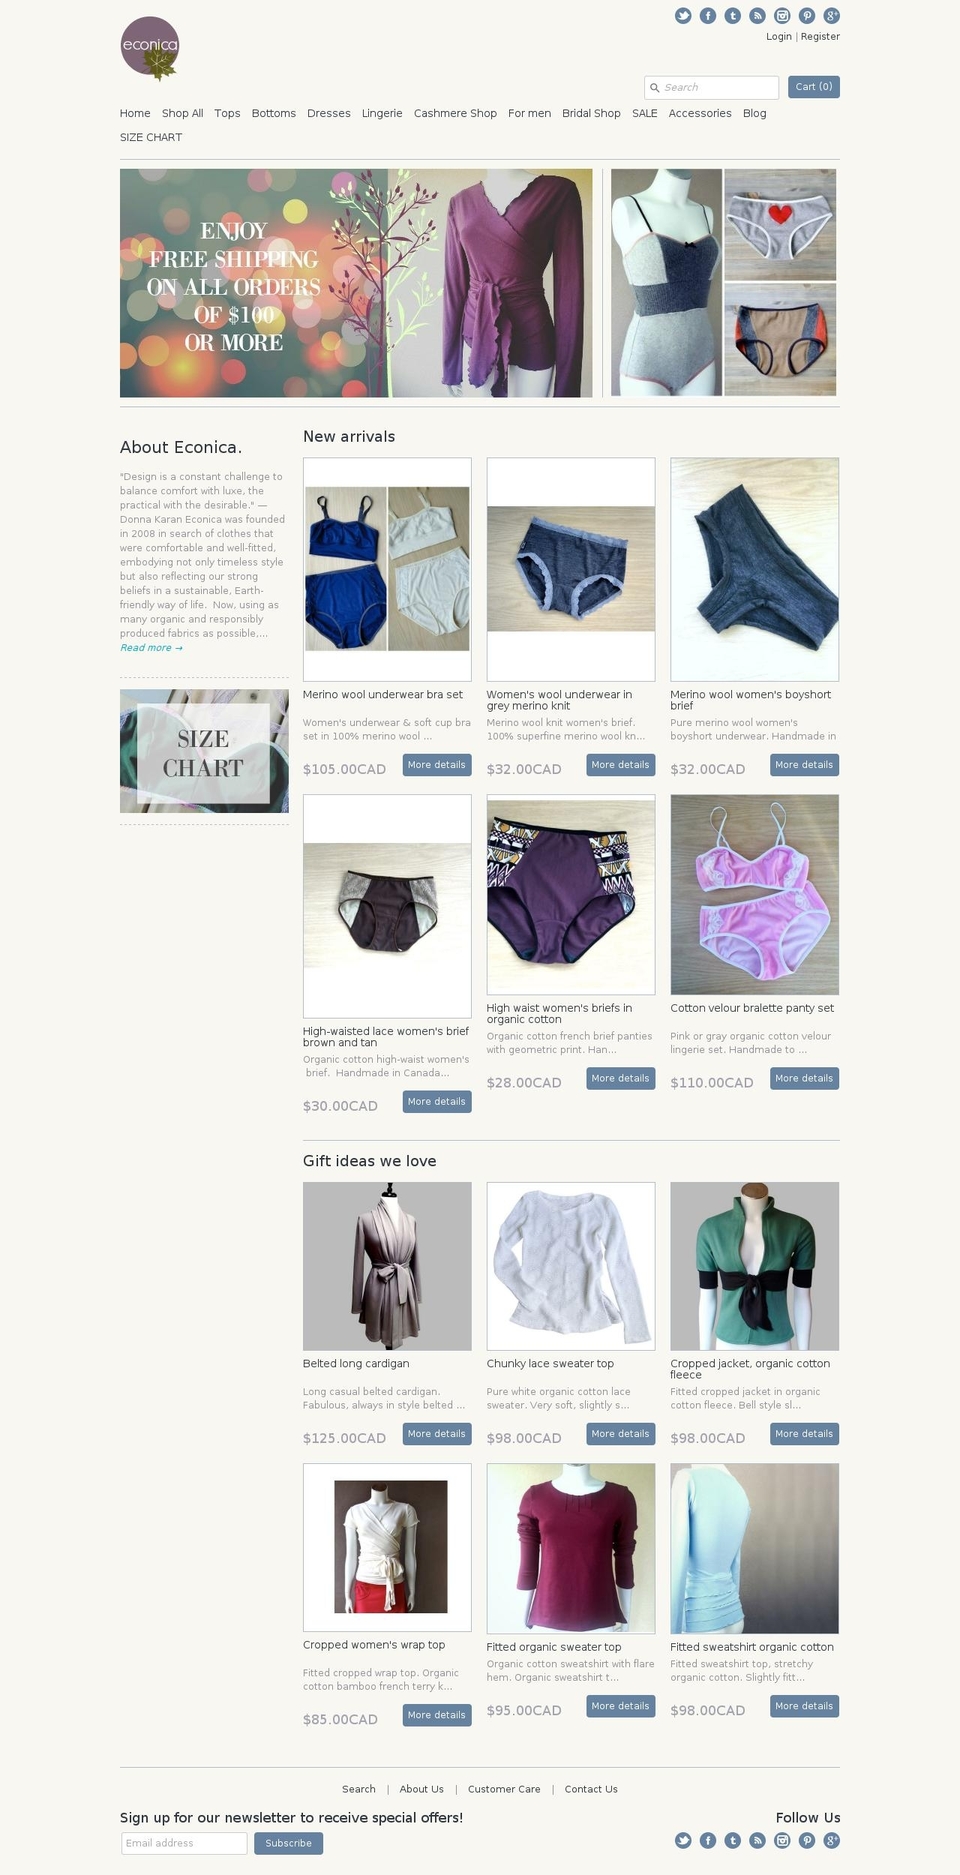 Dawn Shopify theme site example econica.ca